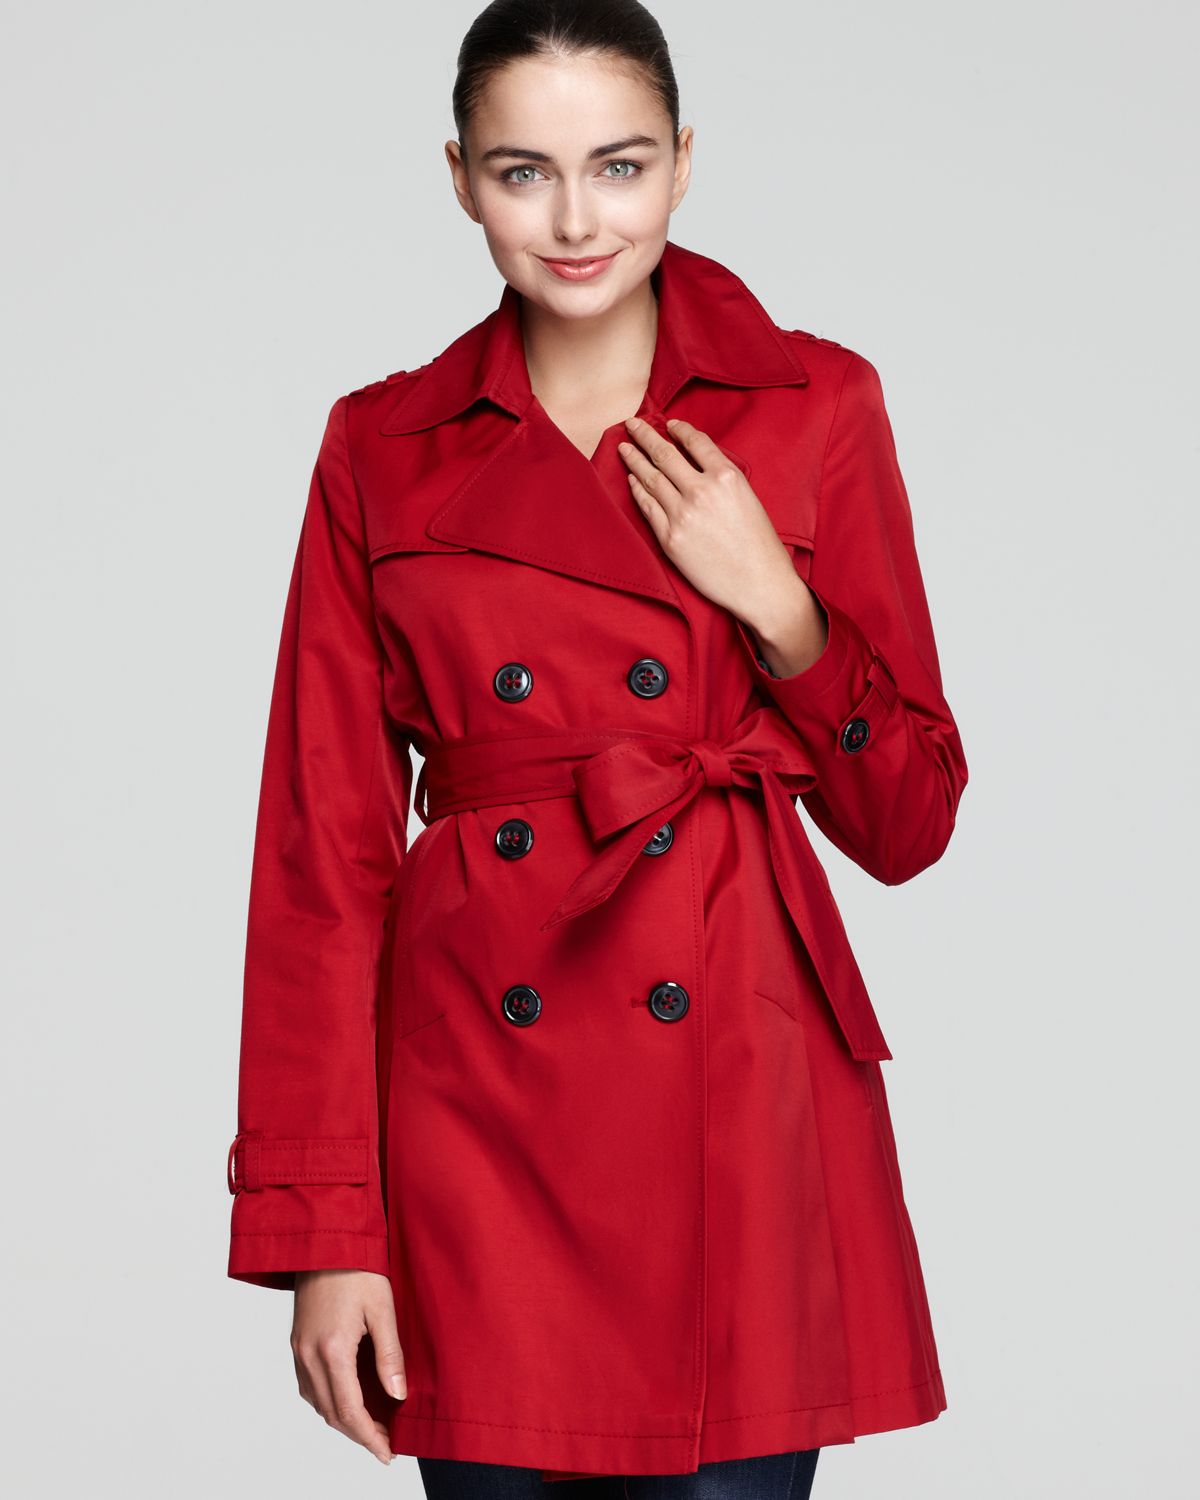 Dkny Megan Double Breasted Trench Coat with Belt in Red (Rebel Red) | Lyst